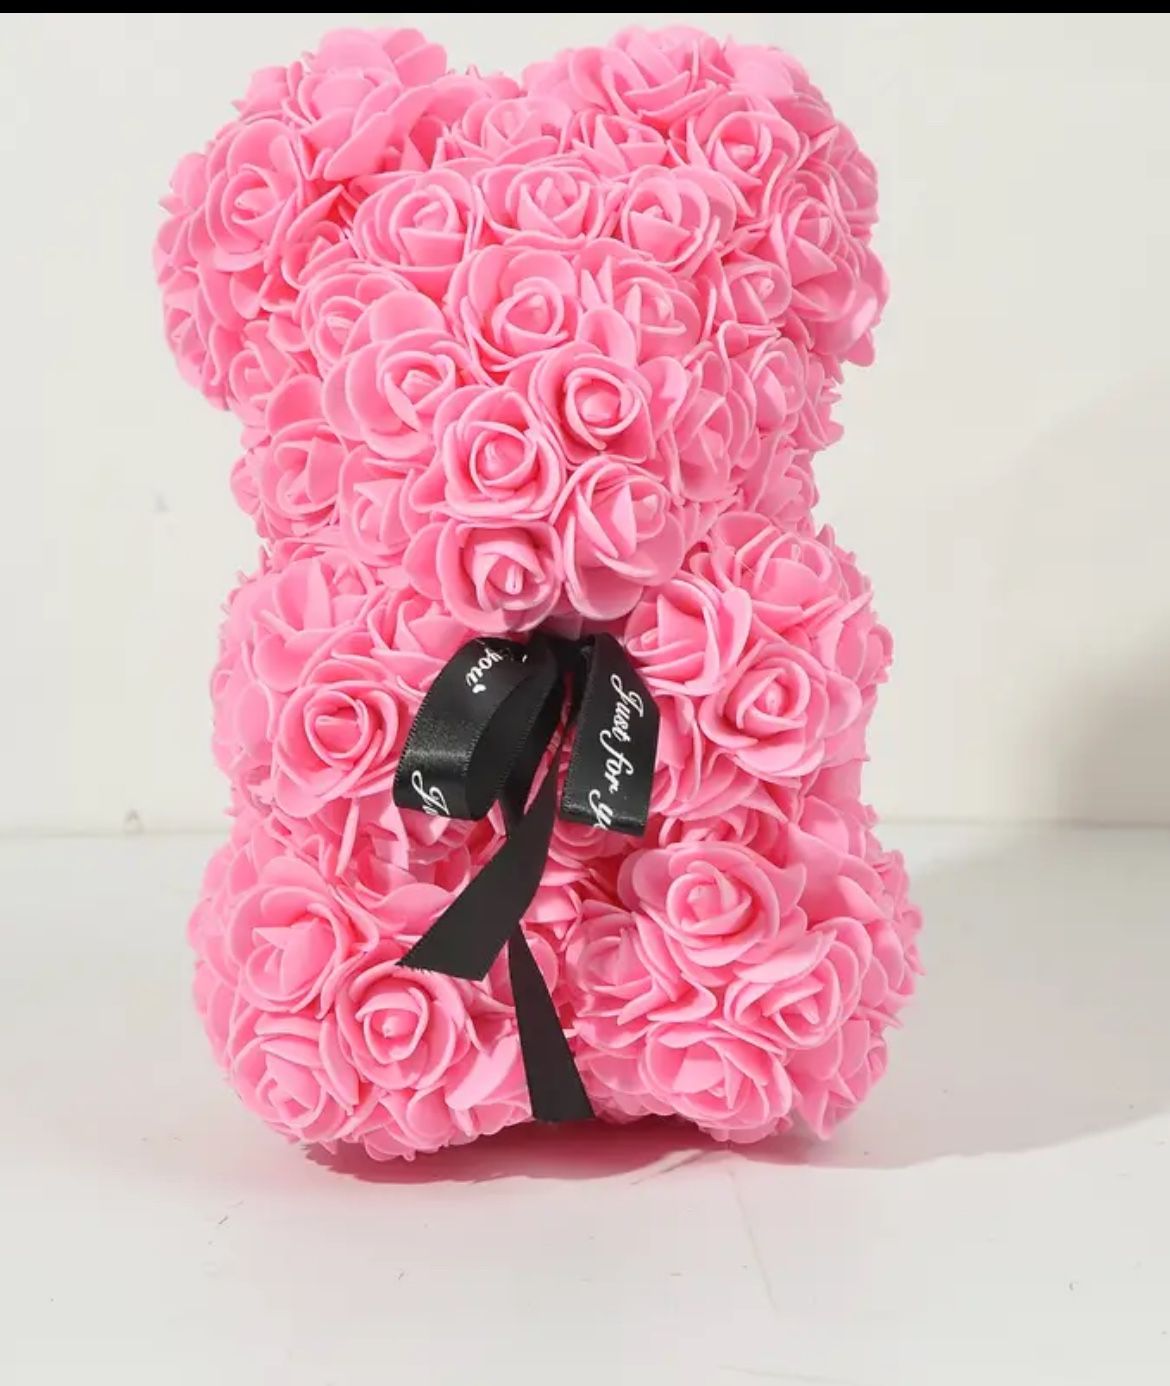 Rose teddy bear for valentines Have 10 of these